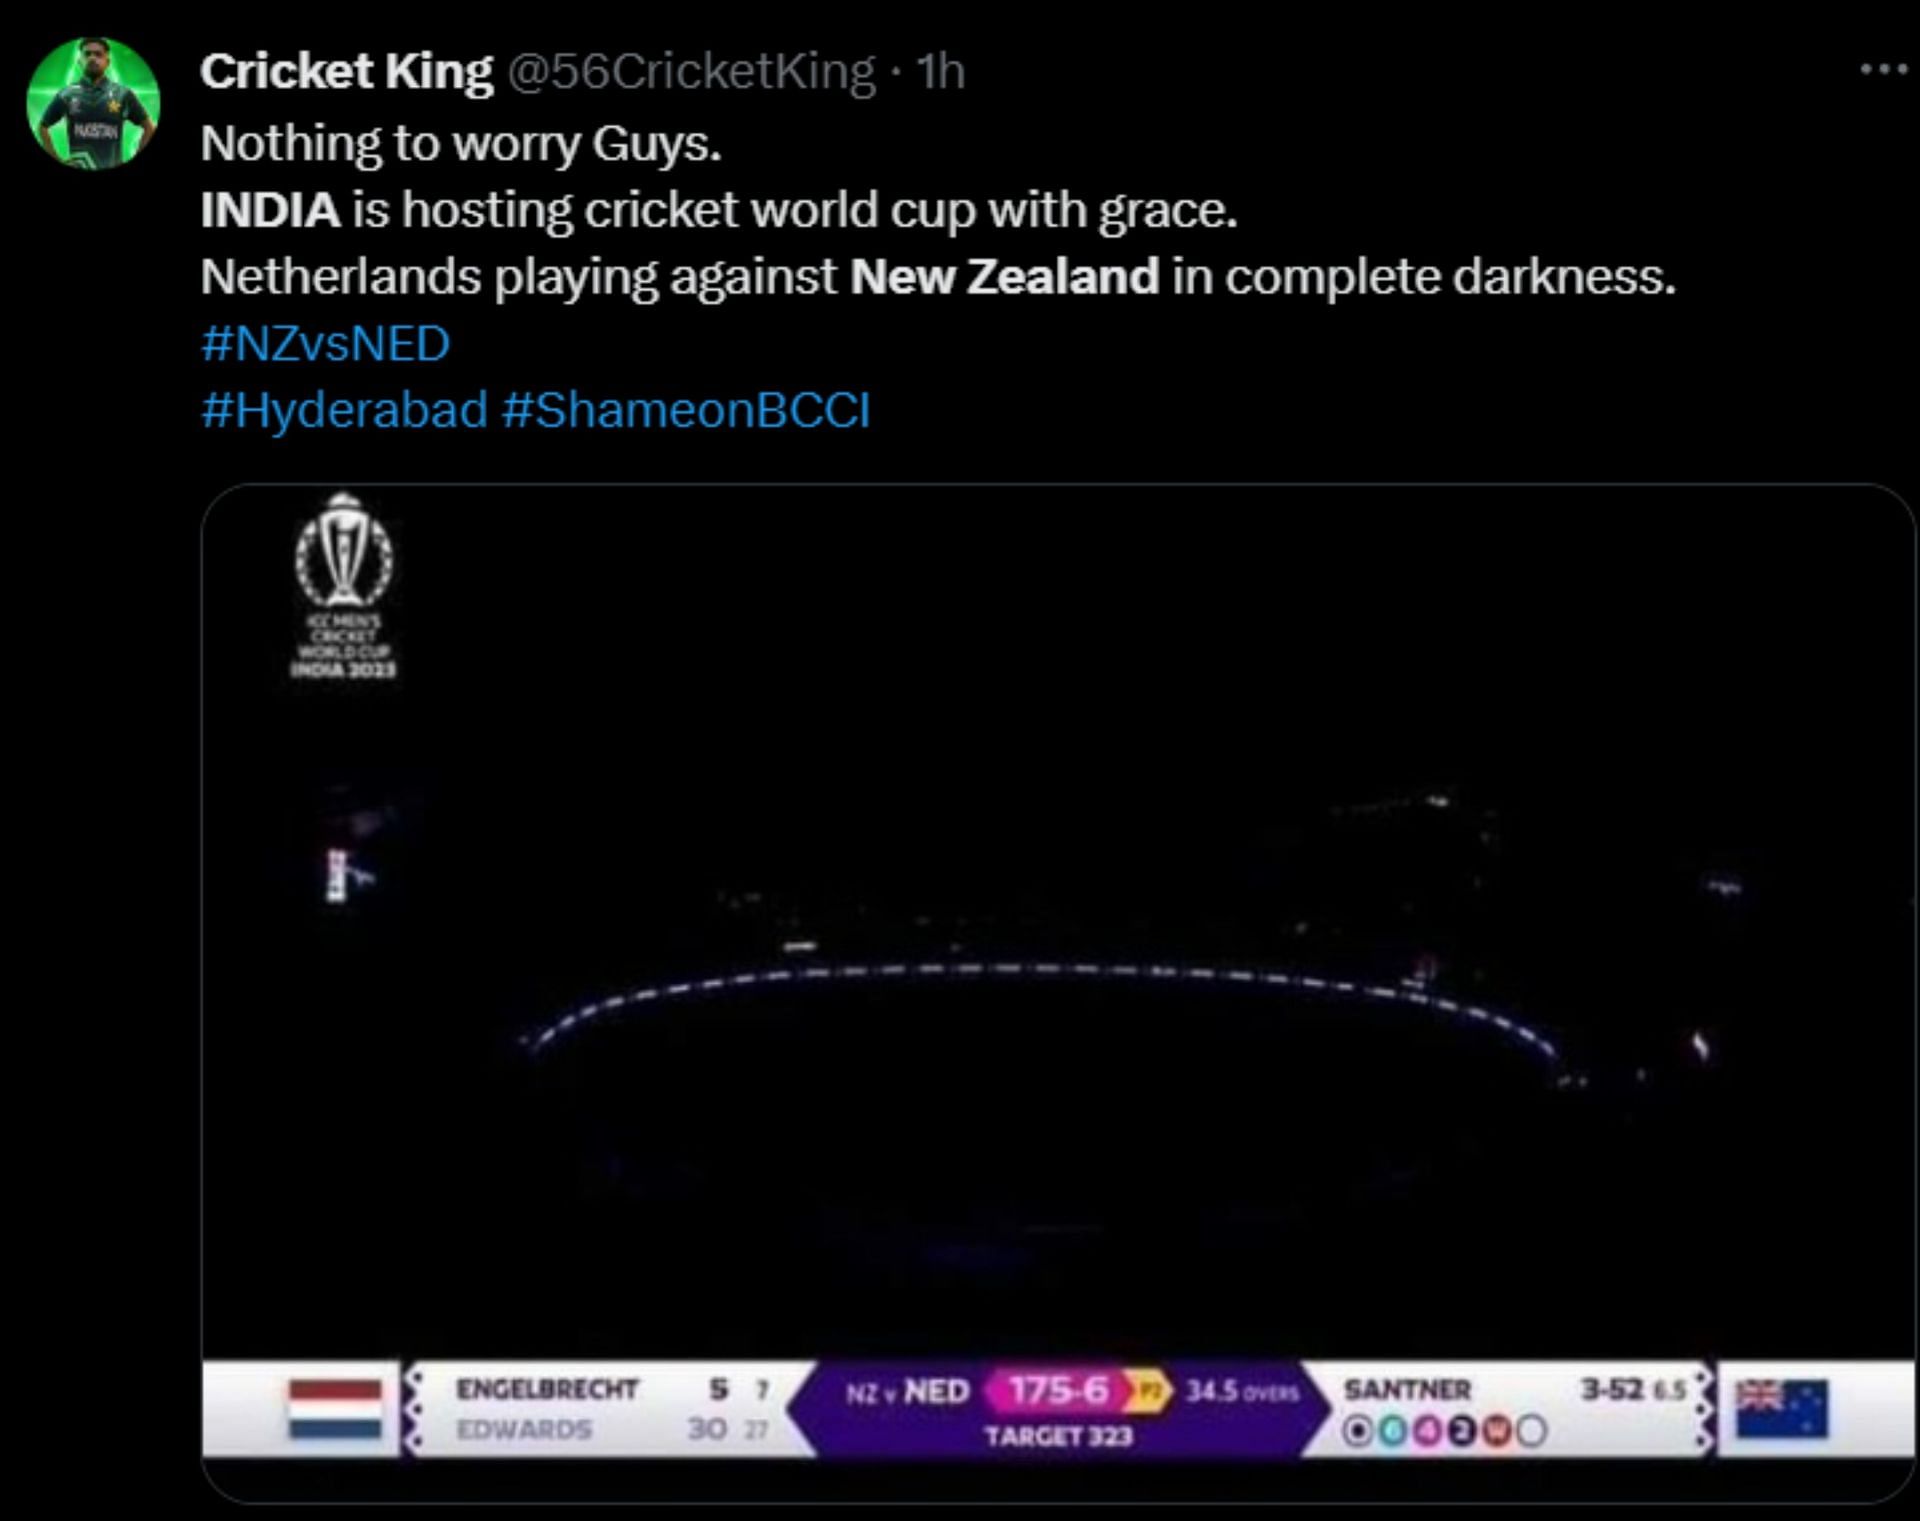 A fan shared a meme related to the New Zealand vs Netherlands match.